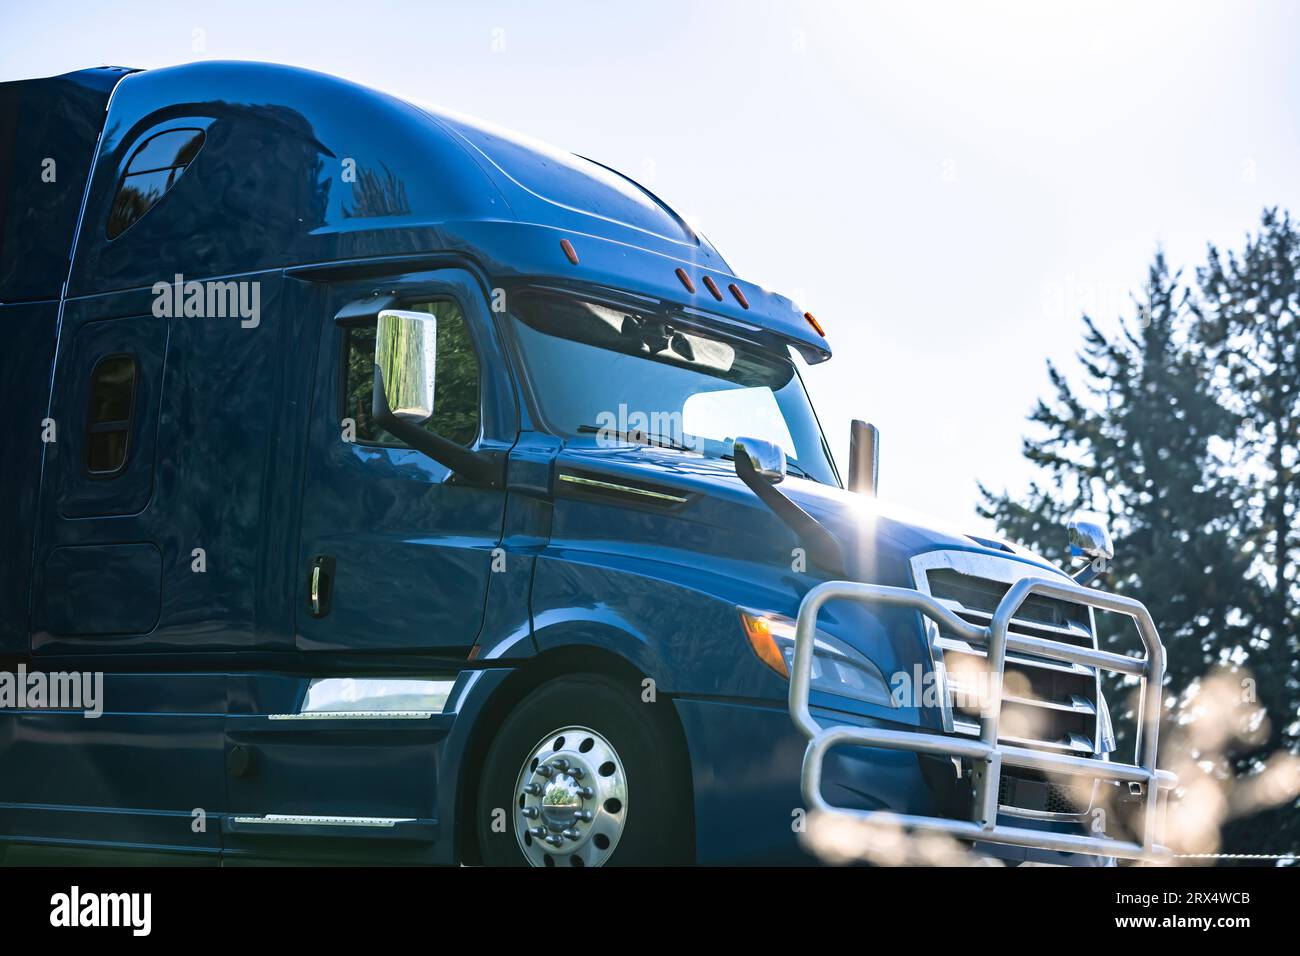 Blue industrial carrier big rig semi truck tractor with heavy duty pipes grille guard and glare from the sun rays on the body running on the highway r Stock Photo